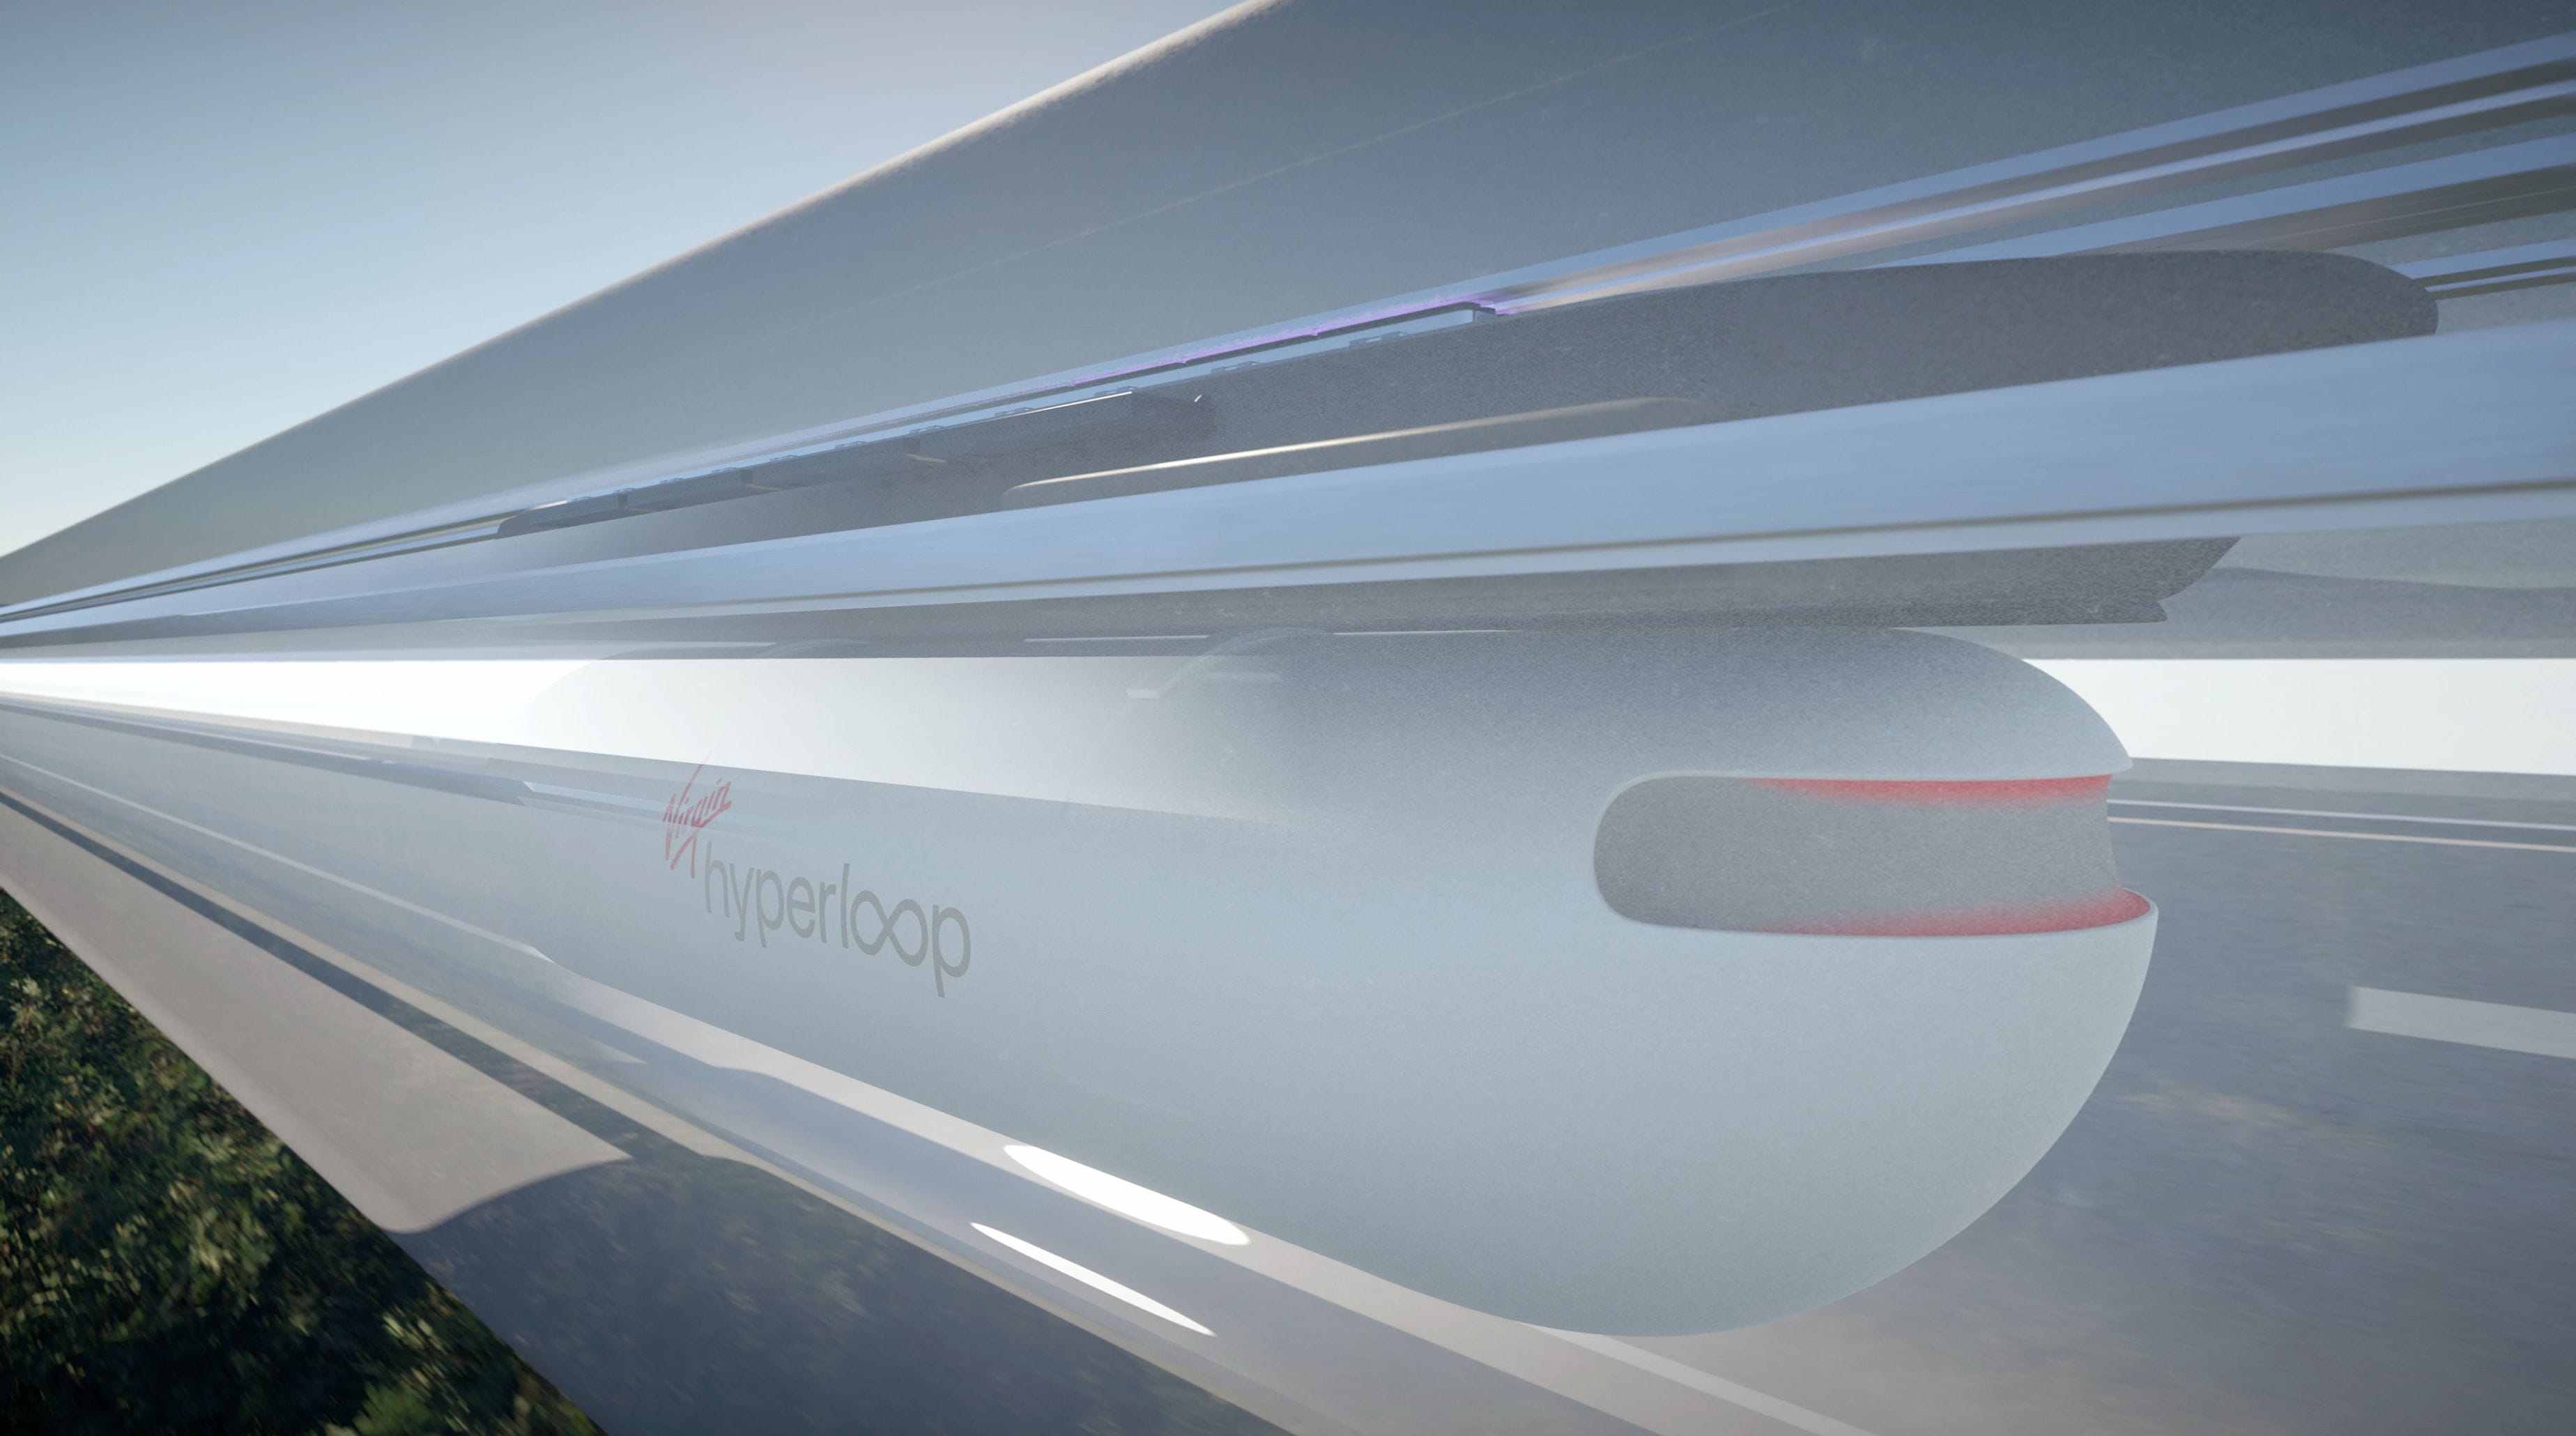 Virgin Hyperloop One Chosen To Represent United States As Apex Of Global Innovation At World’s Fair, Expo 2020, In Dubai